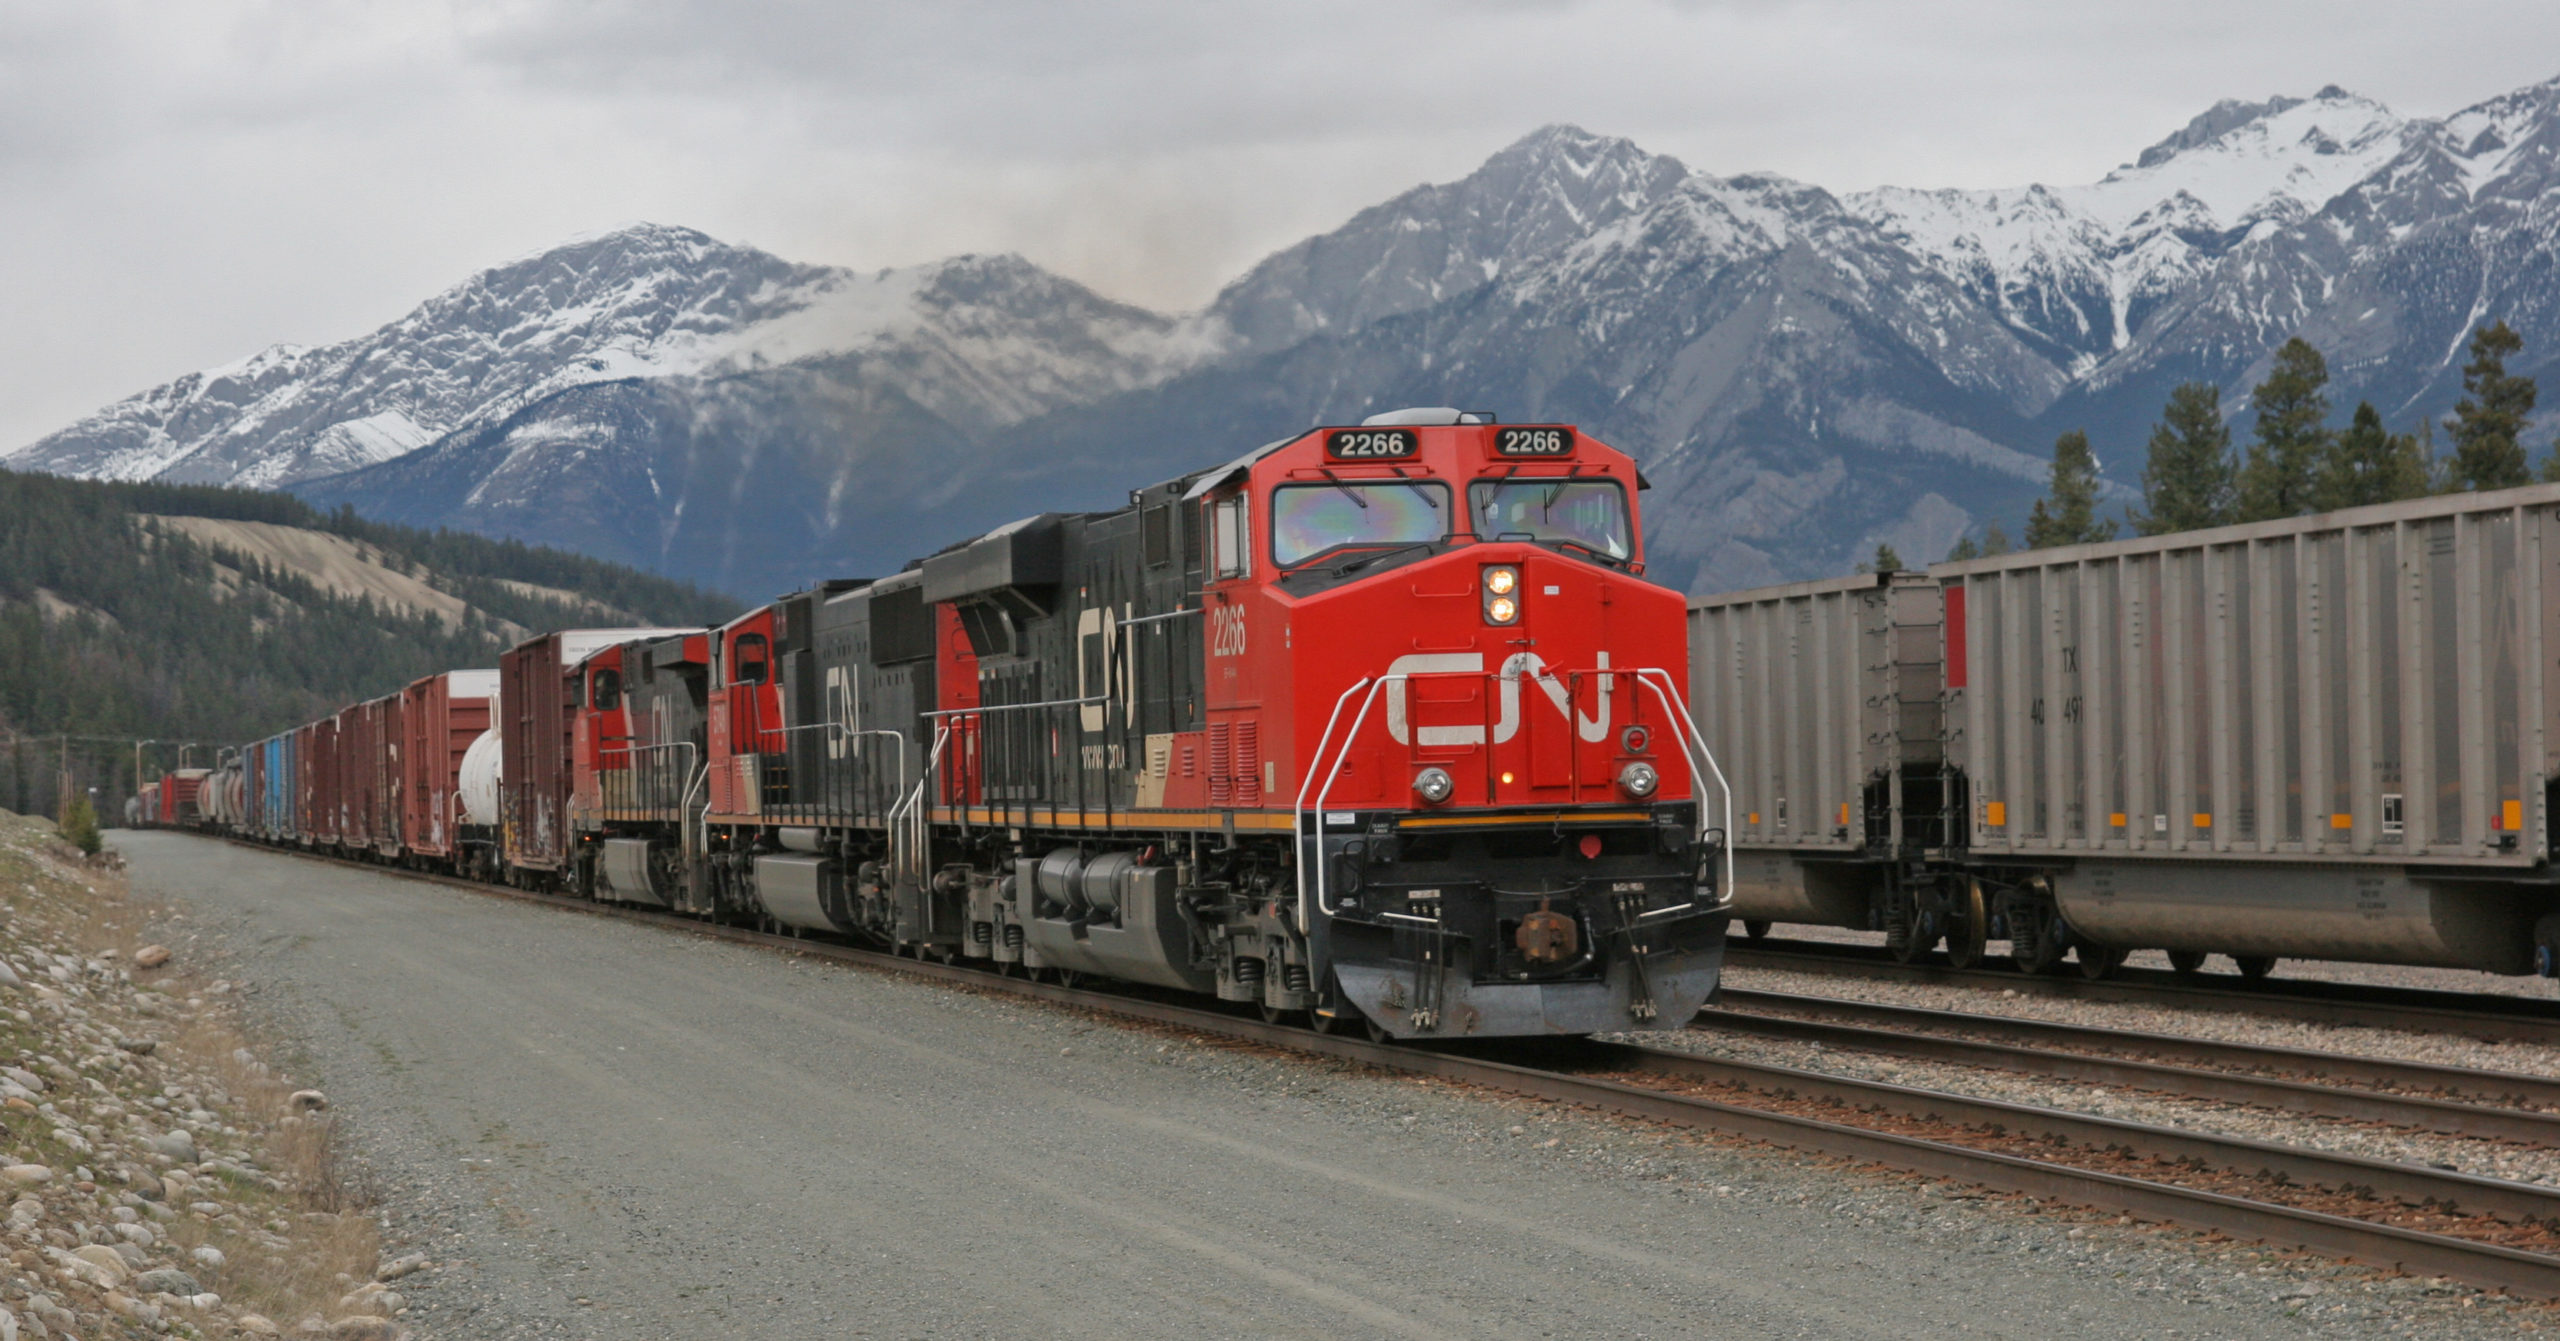 Government of Canada invests over $100 million to modernize rail safety and security